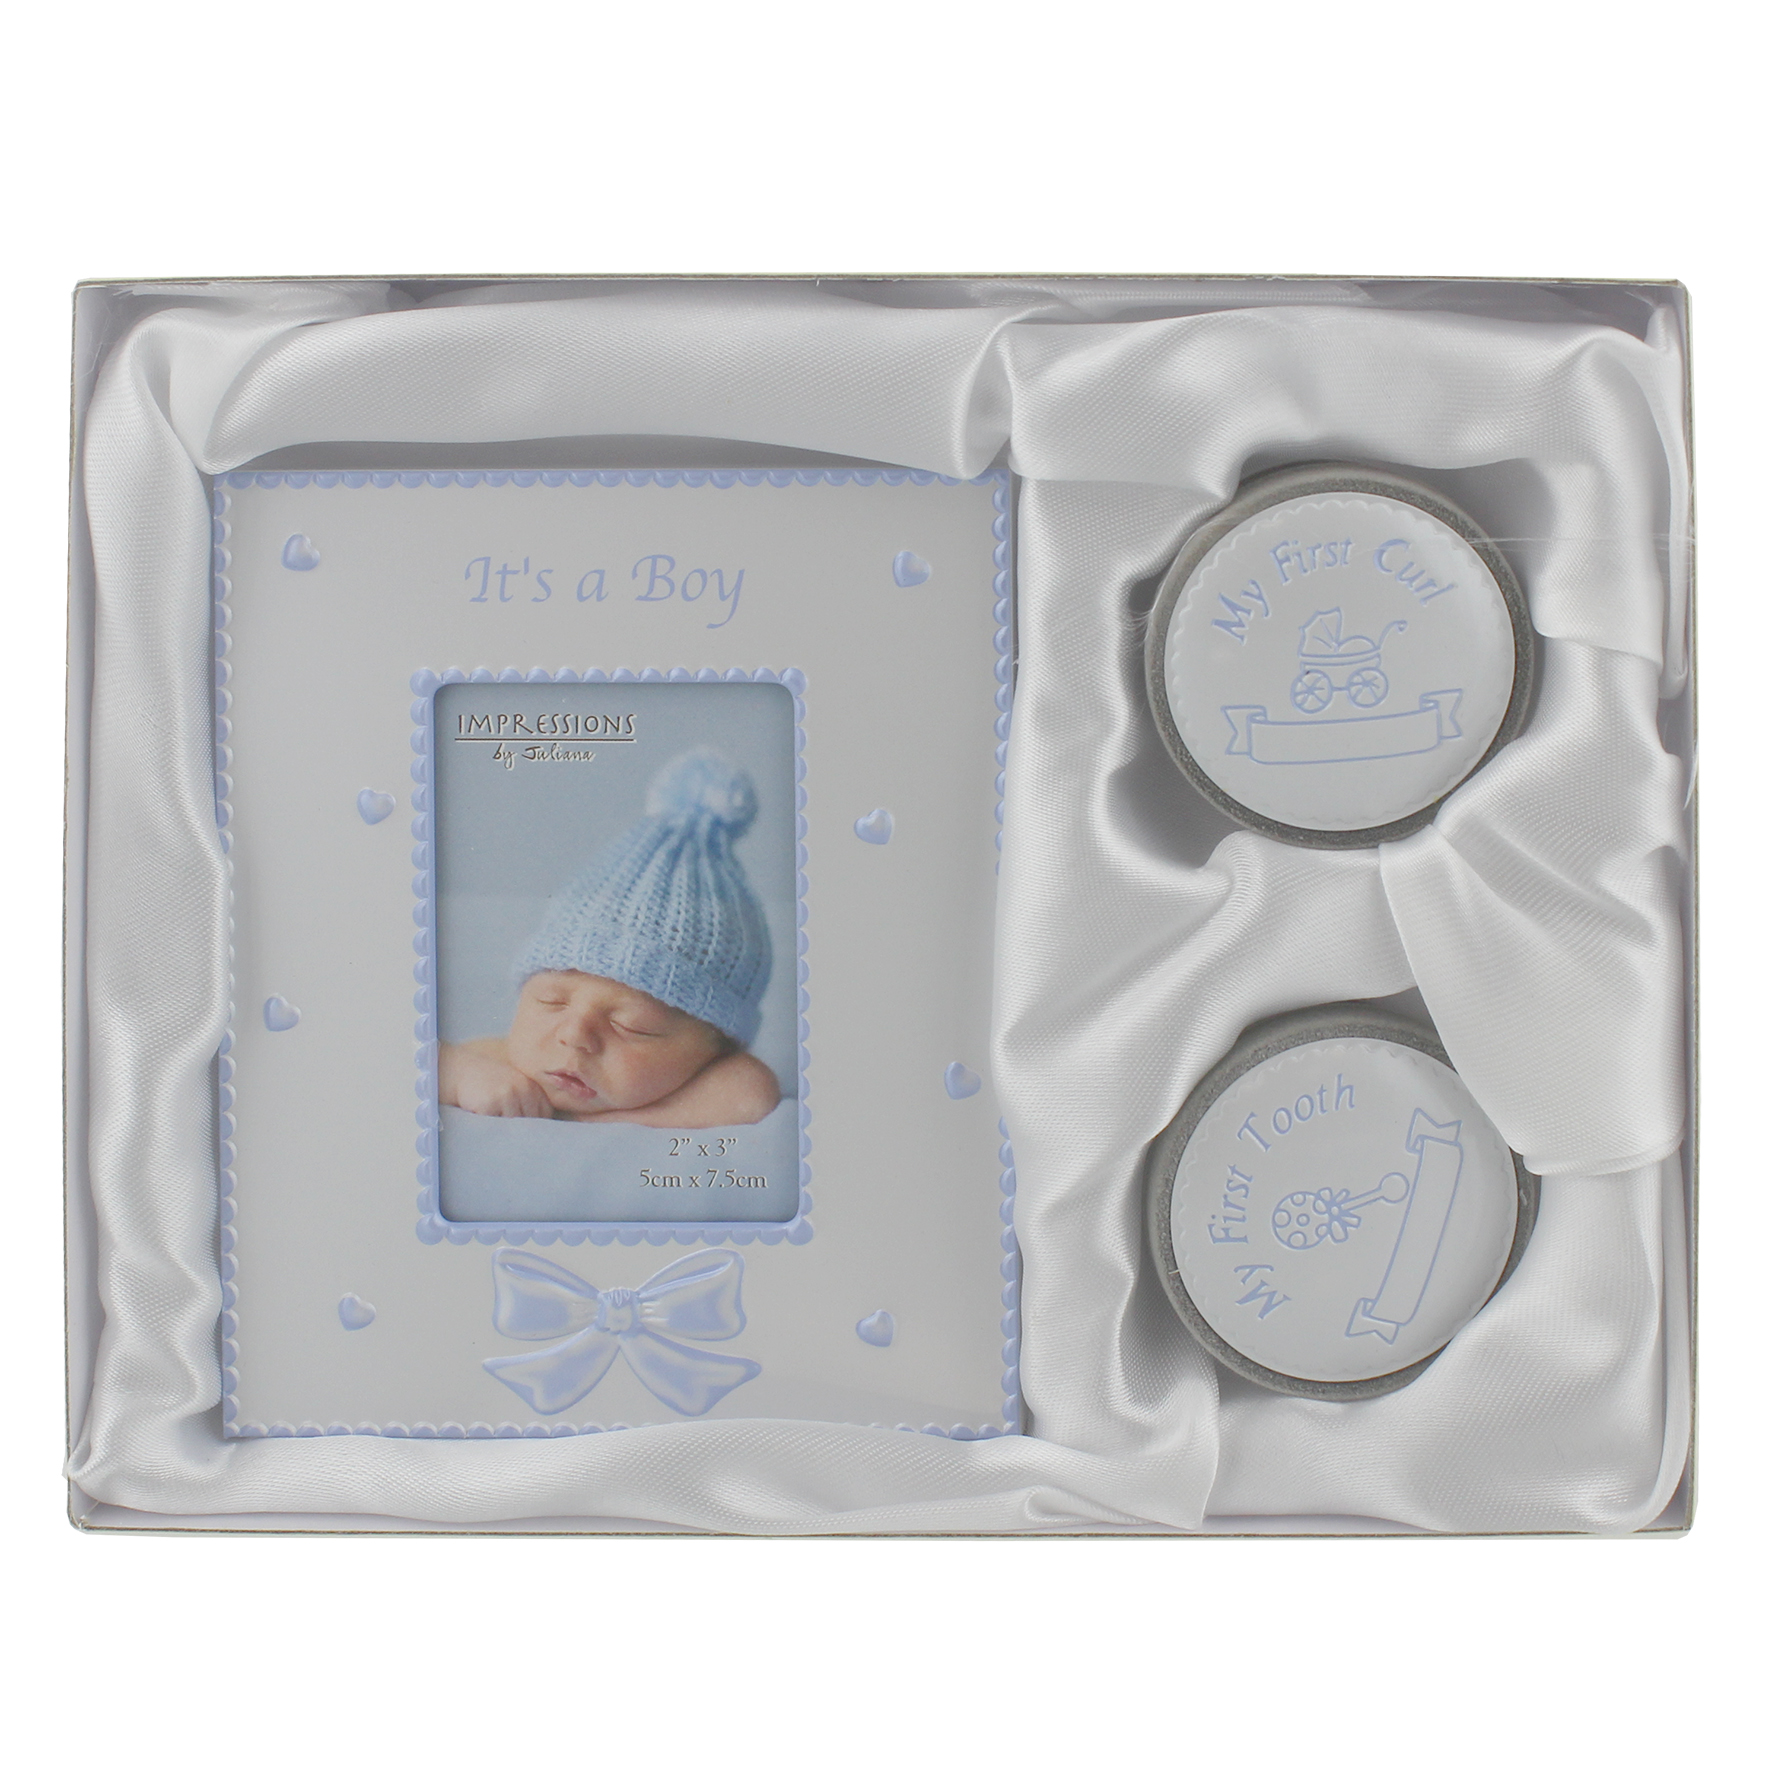 ITS A BOY GIRL PHOTO FRAME & MY FIRST TOOTH CURL BOX BABY GIFT SET BOXED PRESENT 